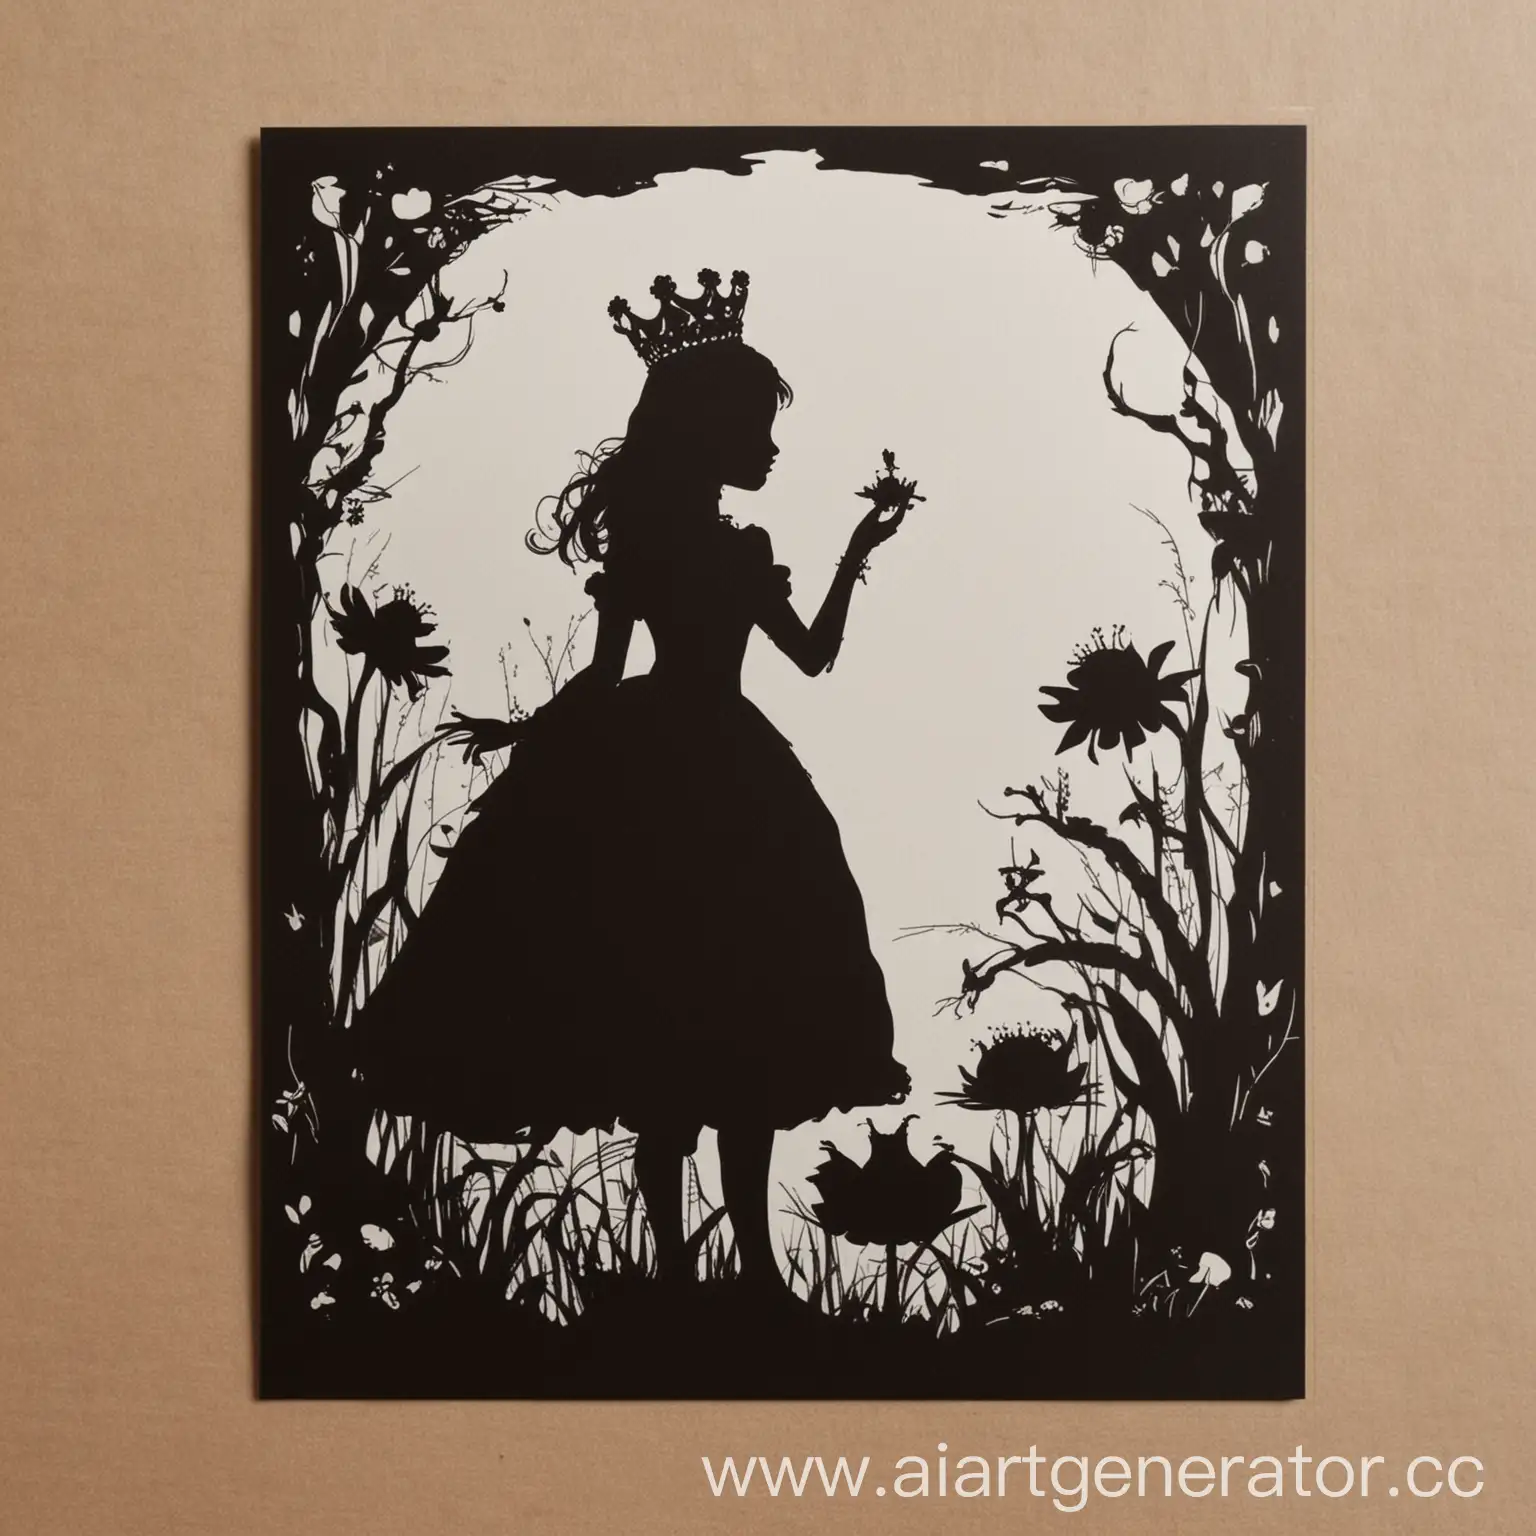 Silhouette-Drawing-of-Frog-Princess-Enchanting-Black-and-White-Illustration